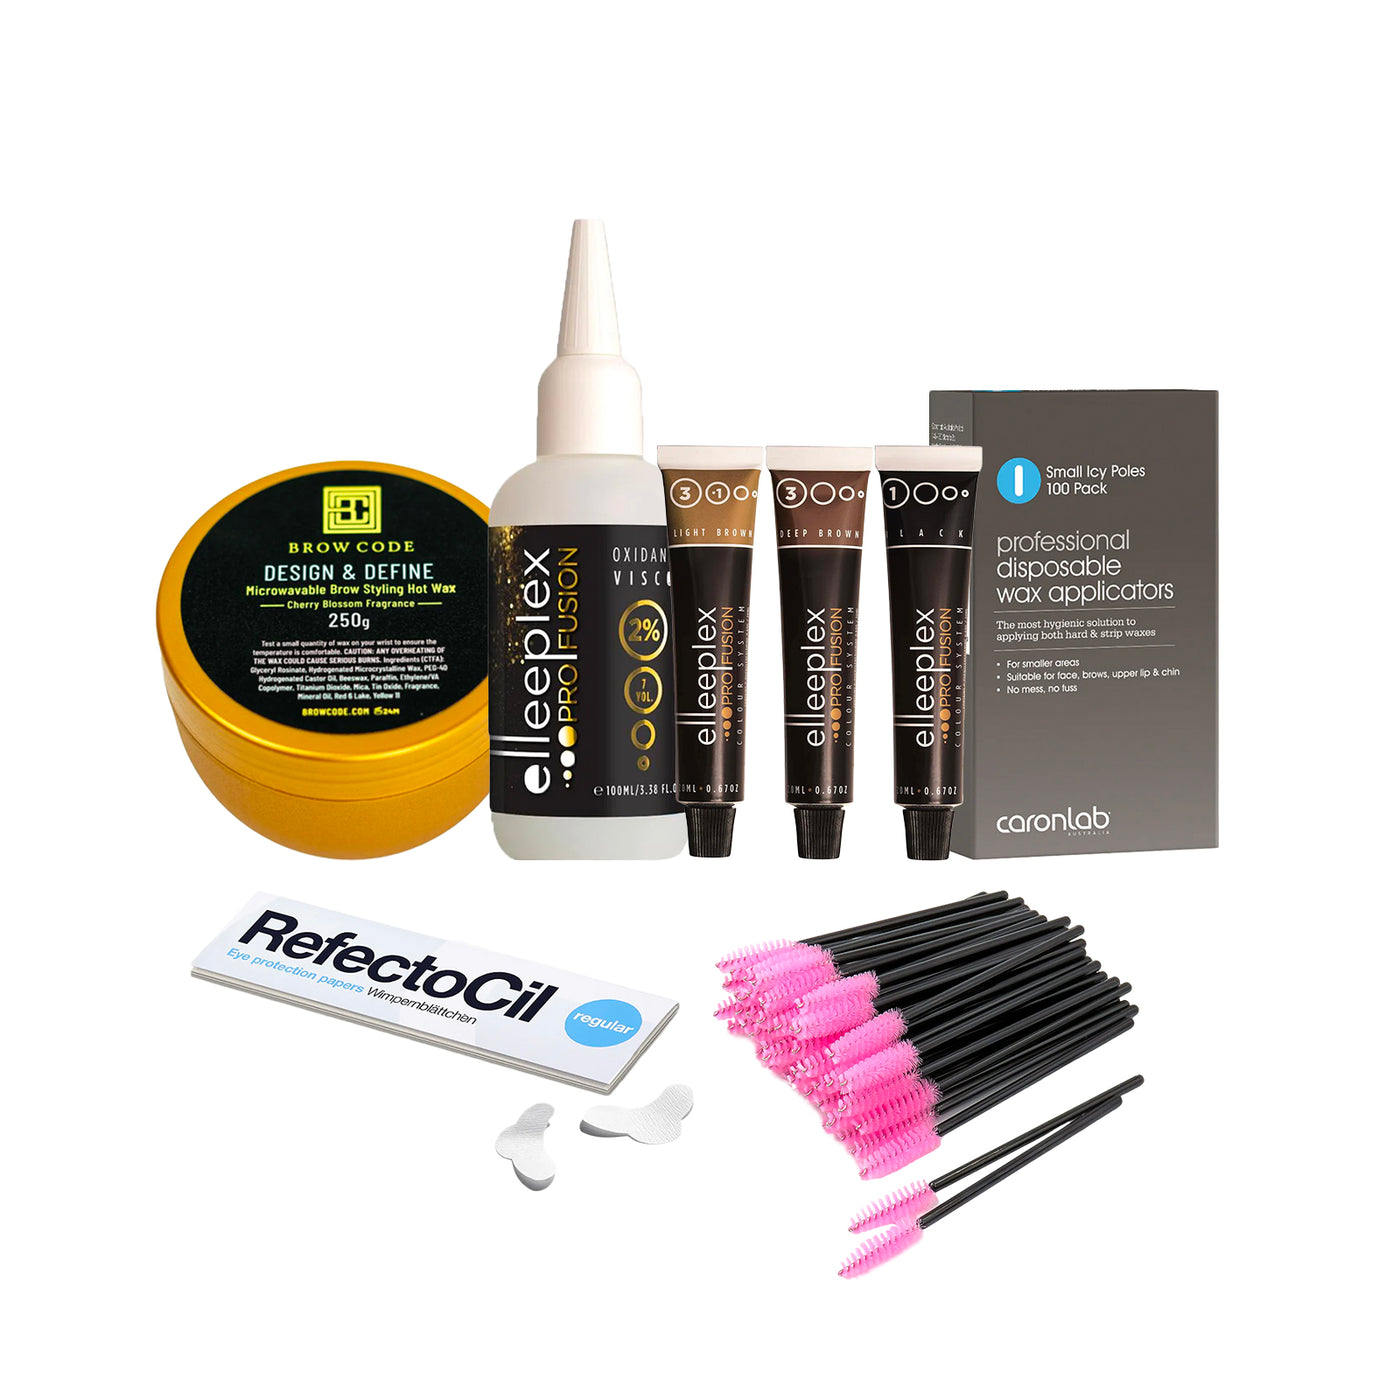 Mini Essentials Kit - for Lash & Brow Tint and Brow Wax